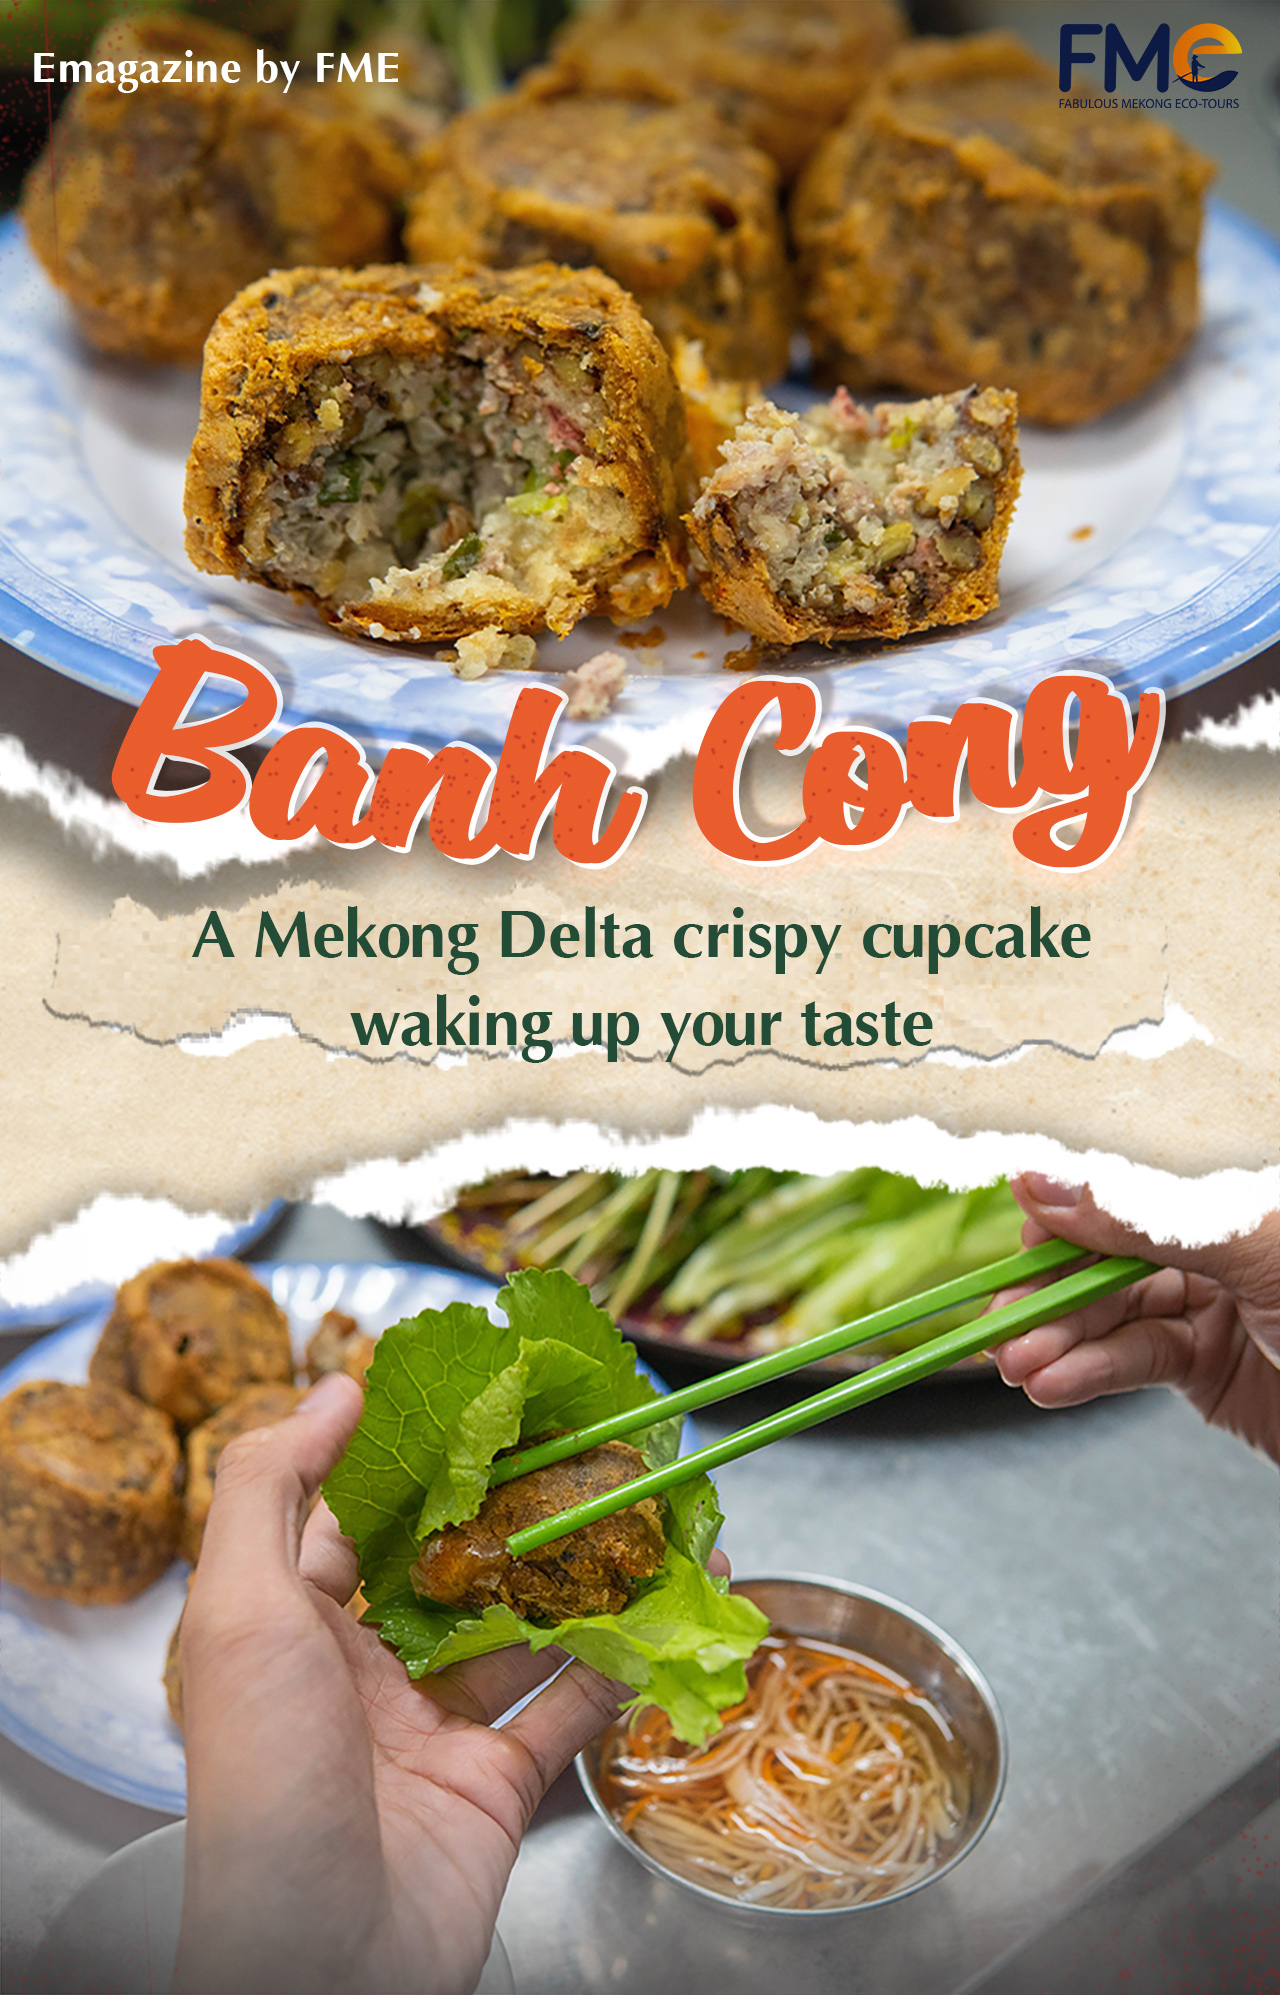 Banh Cong Emagazine fried prawn cake in Can Tho